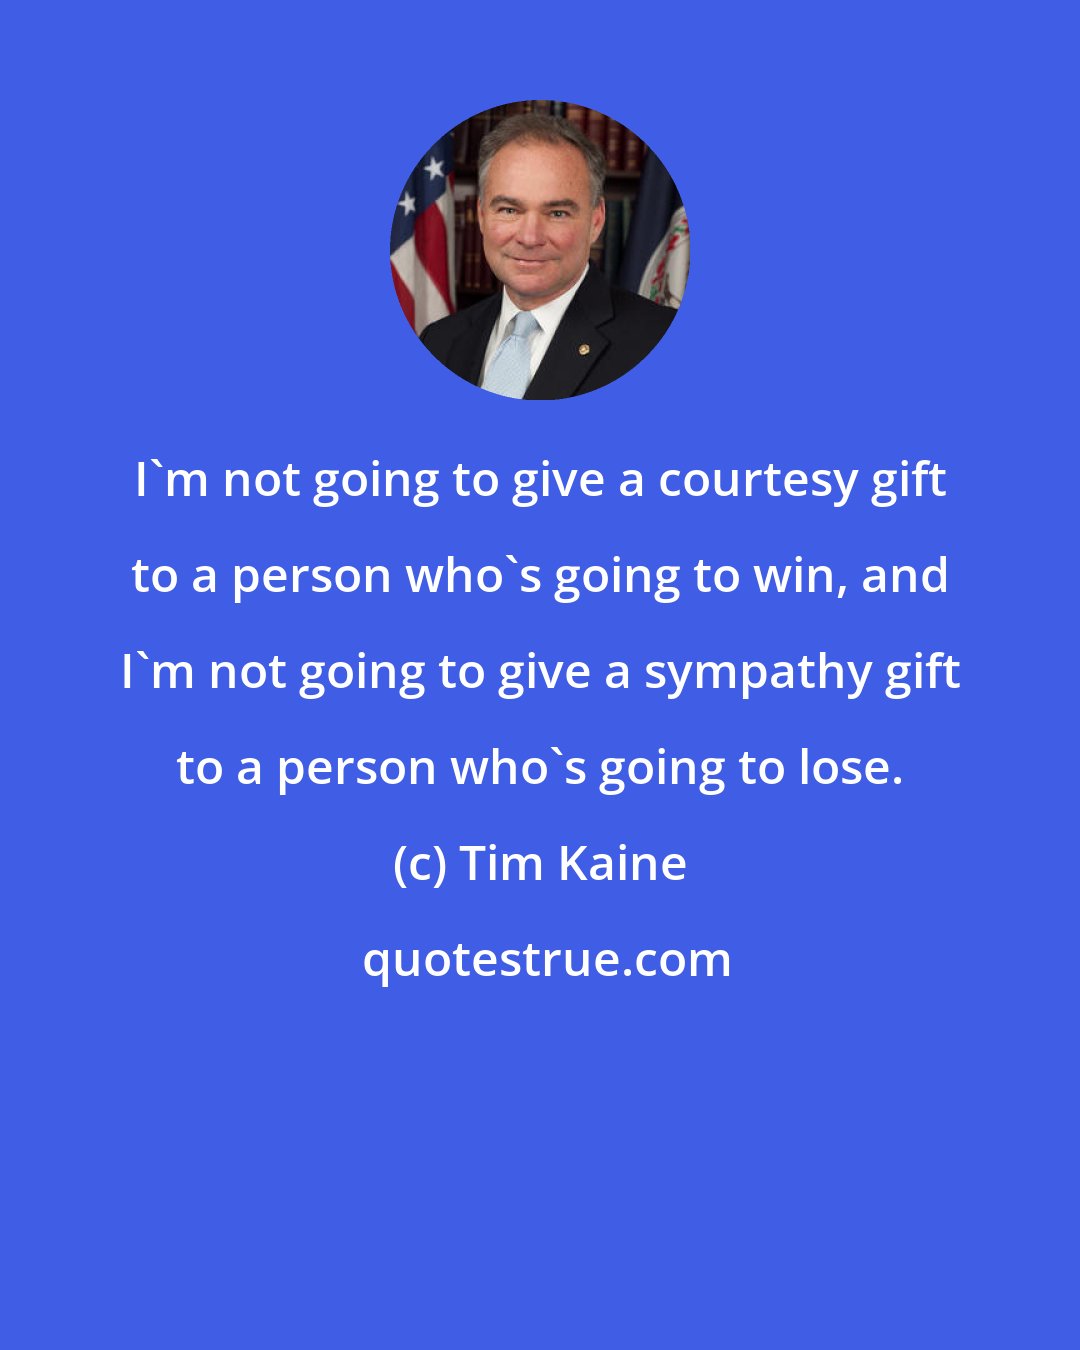 Tim Kaine: I'm not going to give a courtesy gift to a person who's going to win, and I'm not going to give a sympathy gift to a person who's going to lose.